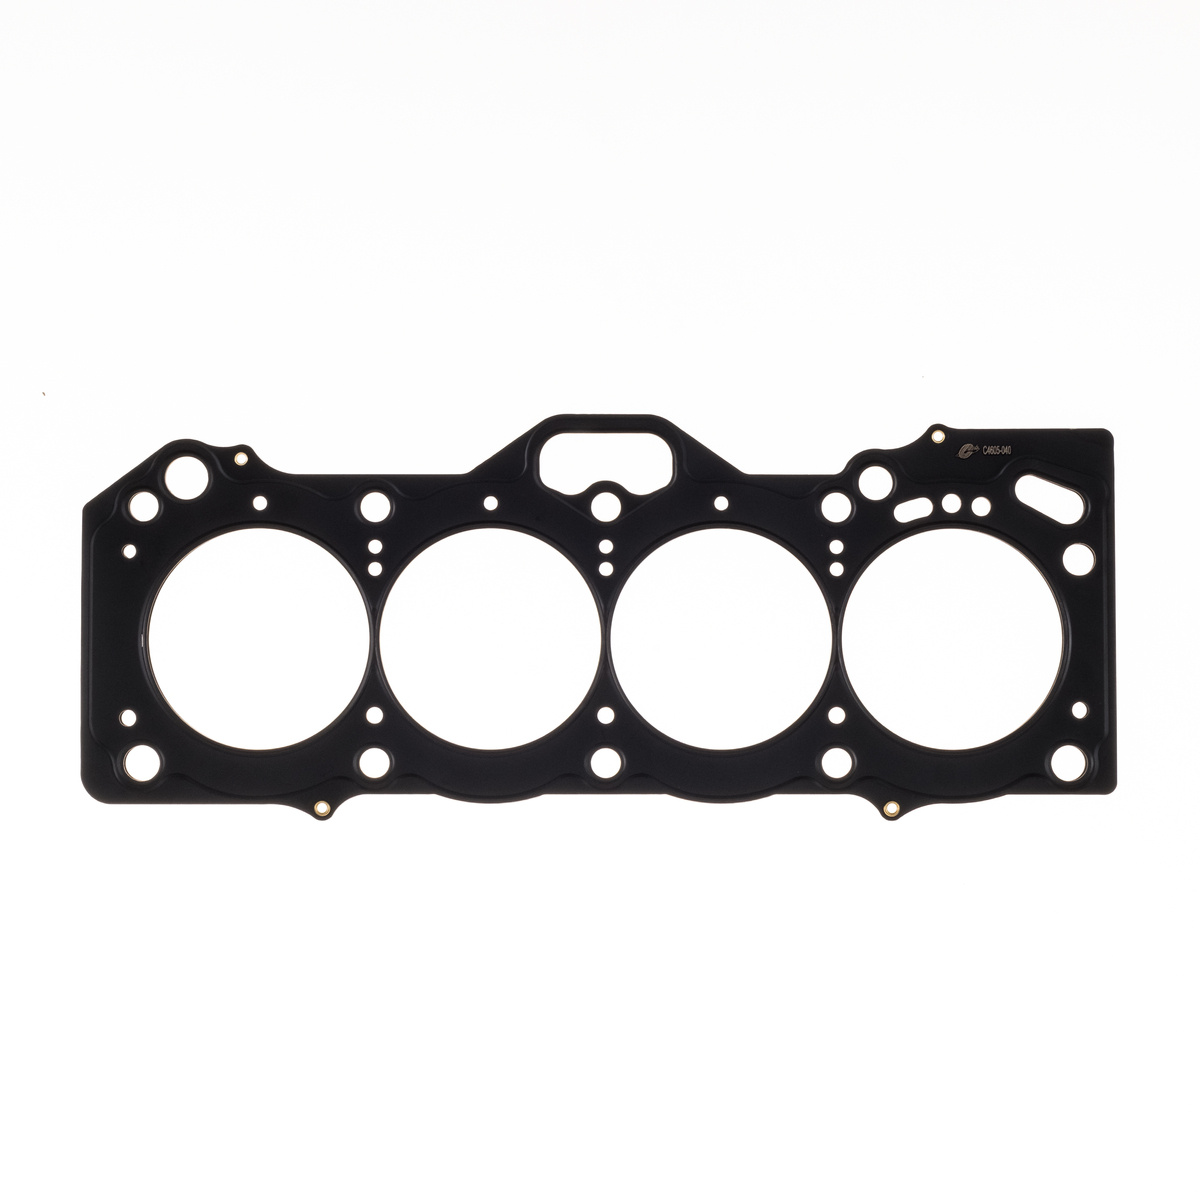 Cylinder Head Gasket Toyota 4A-GE .120" MLS , 81mm Bore, 20-Valve Cometic C4604-120